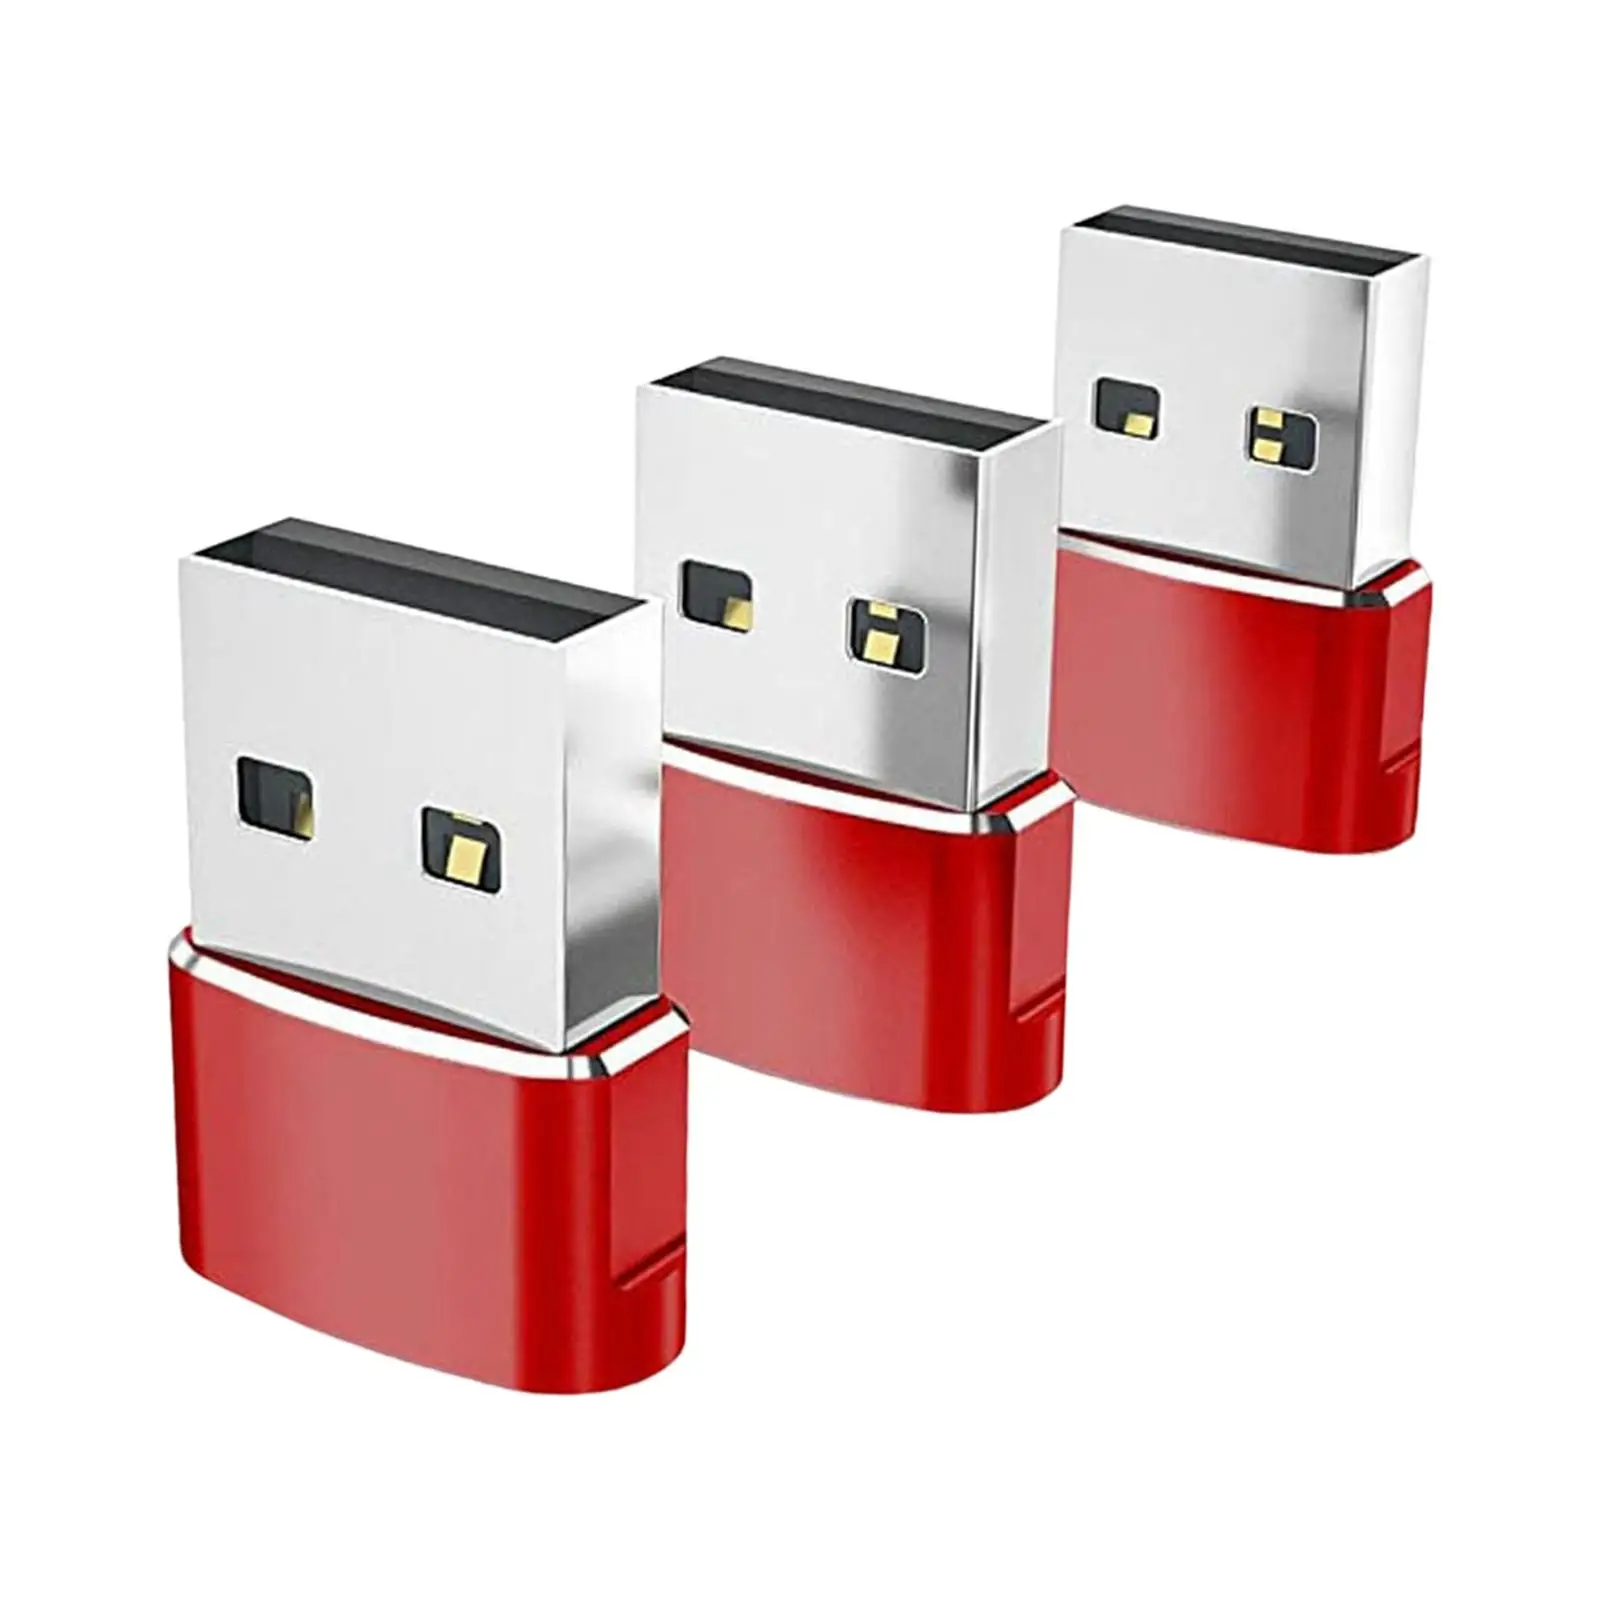 3x Universal Type-C 3.1 to USB 2.0 Adapter Fast Data Transfer for Computers Phones